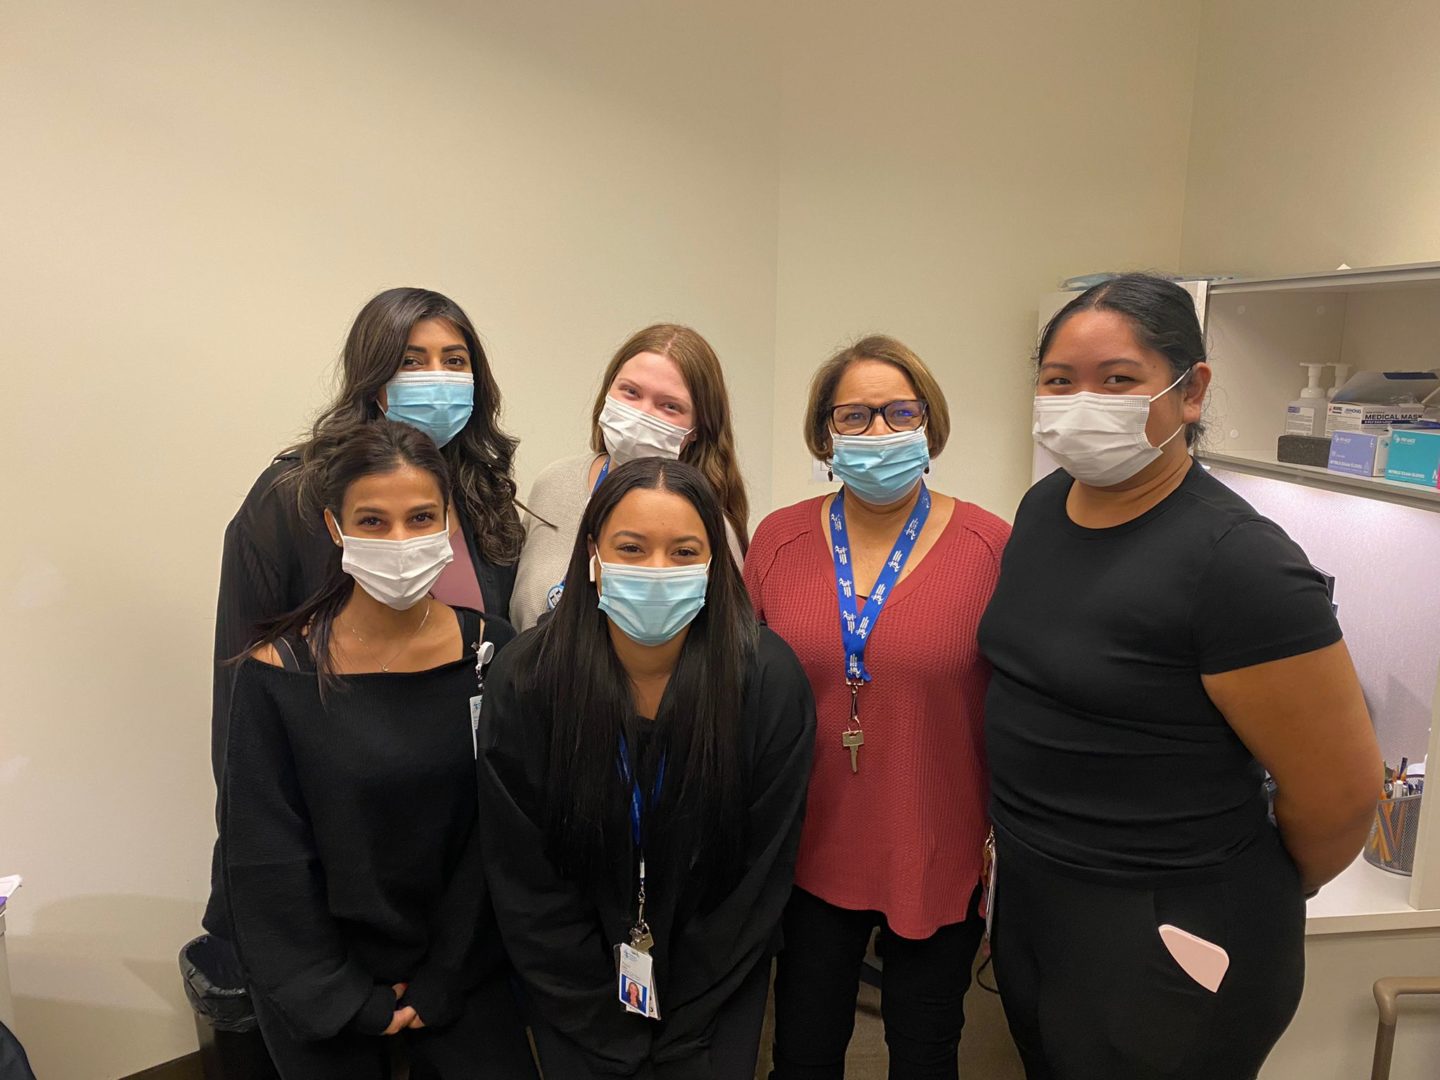 a group of women wearing medical masks stand together for a photo